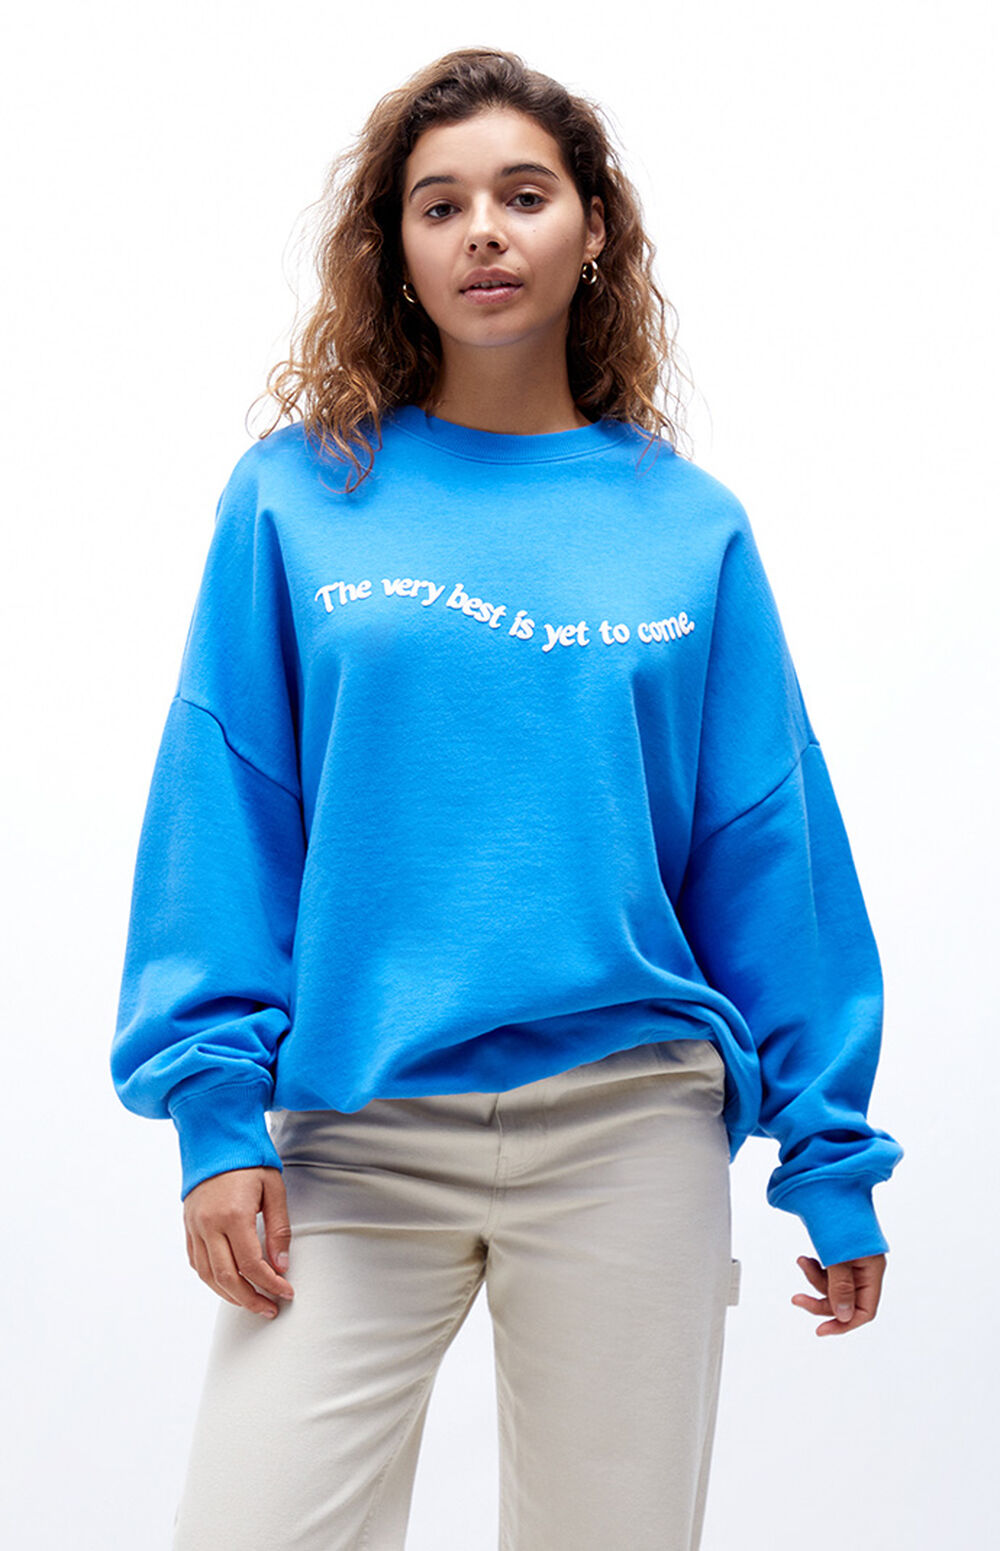 PacSun Best Is Yet To Come Sweatshirt | PacSun